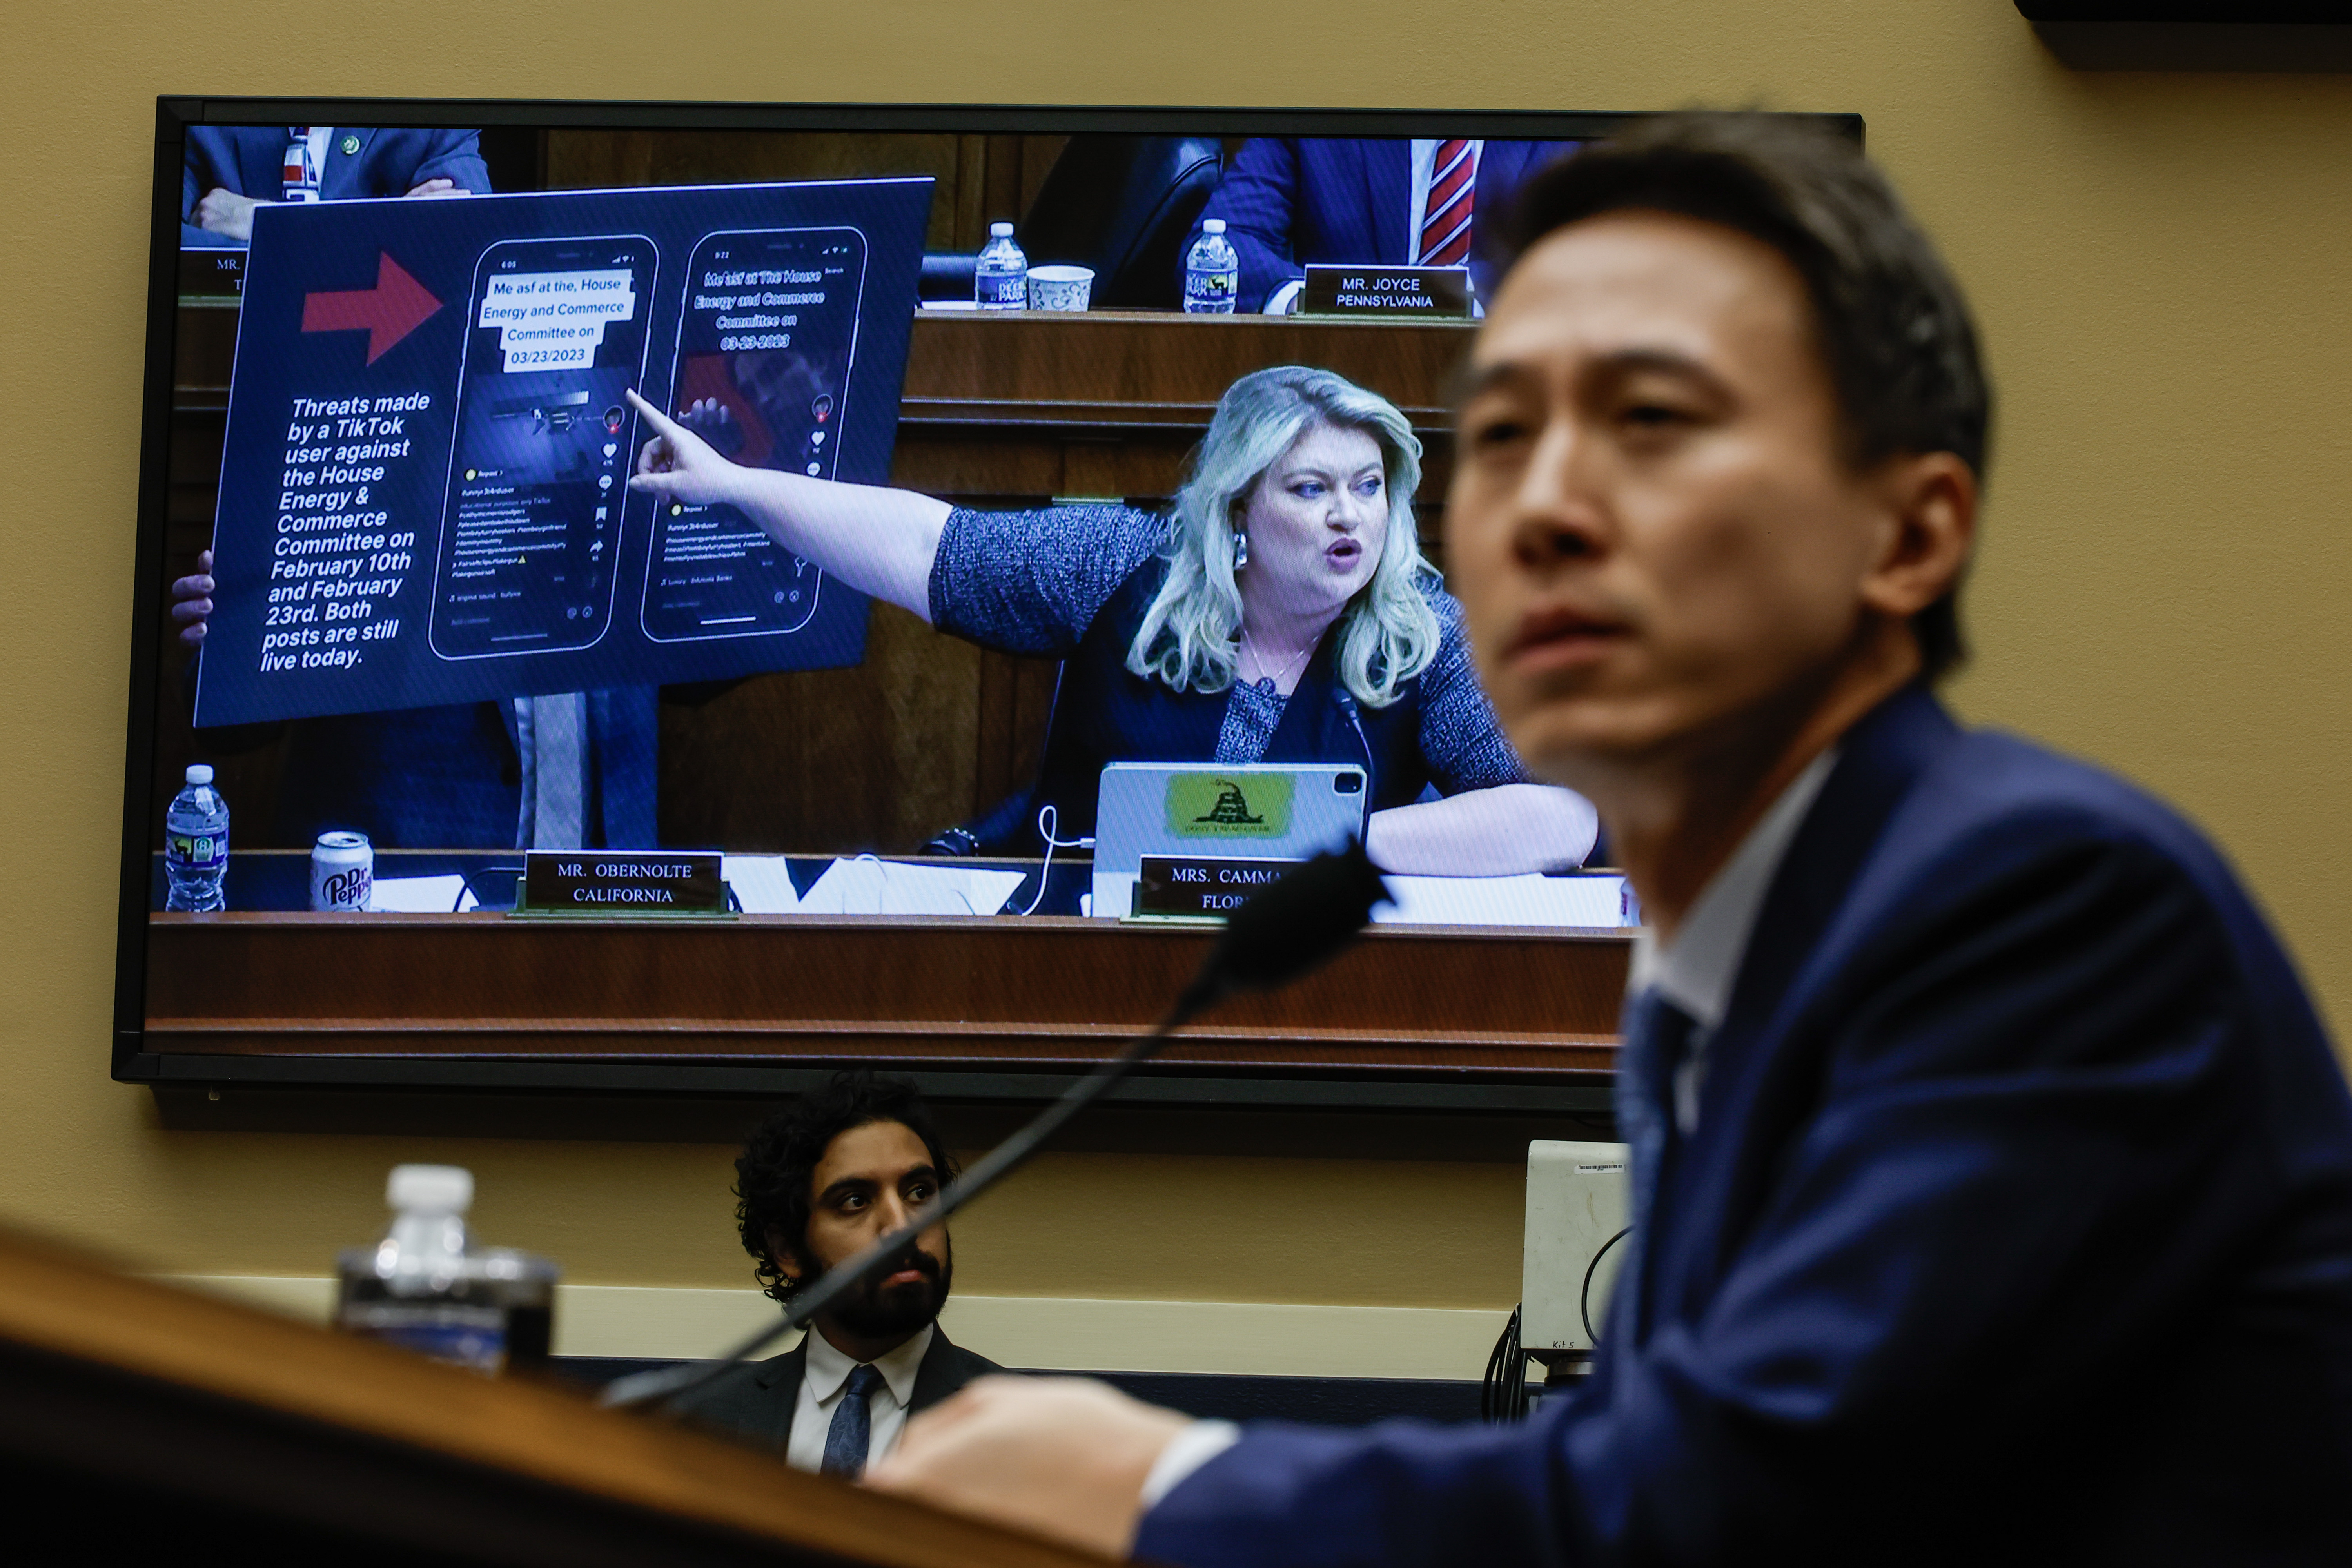 Despite hiring a large group of savvy friends, TikTok CEO Shou Zi Chew and his company failed to win over the House Energy and Commerce Committee panel.